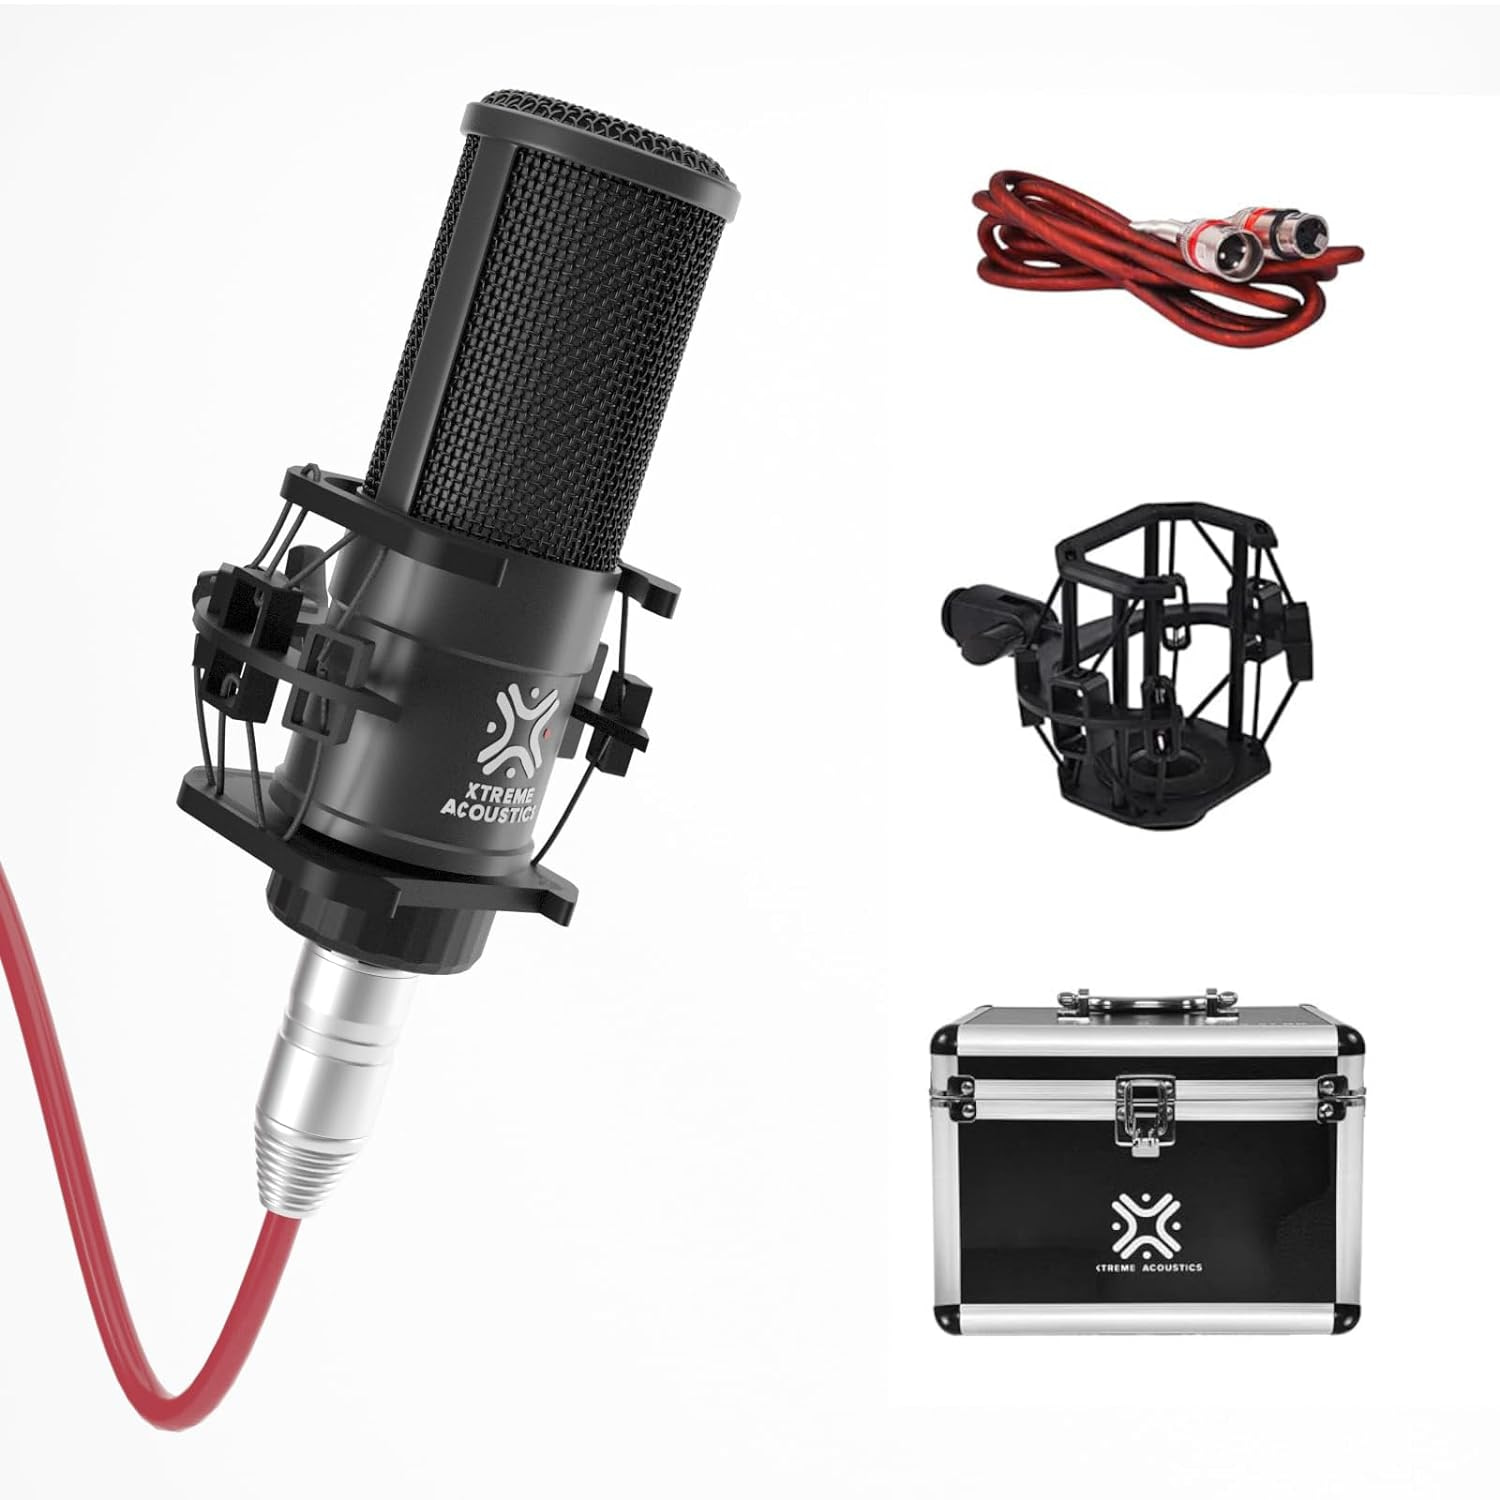 You are currently viewing Xtreme Acoustics C-01 (Black) Professional Studio Condenser Microphone with Flight Case, Shock Mount and 2m XLR Cable (FREE ONLINE LEARNING COURSE INCL.)